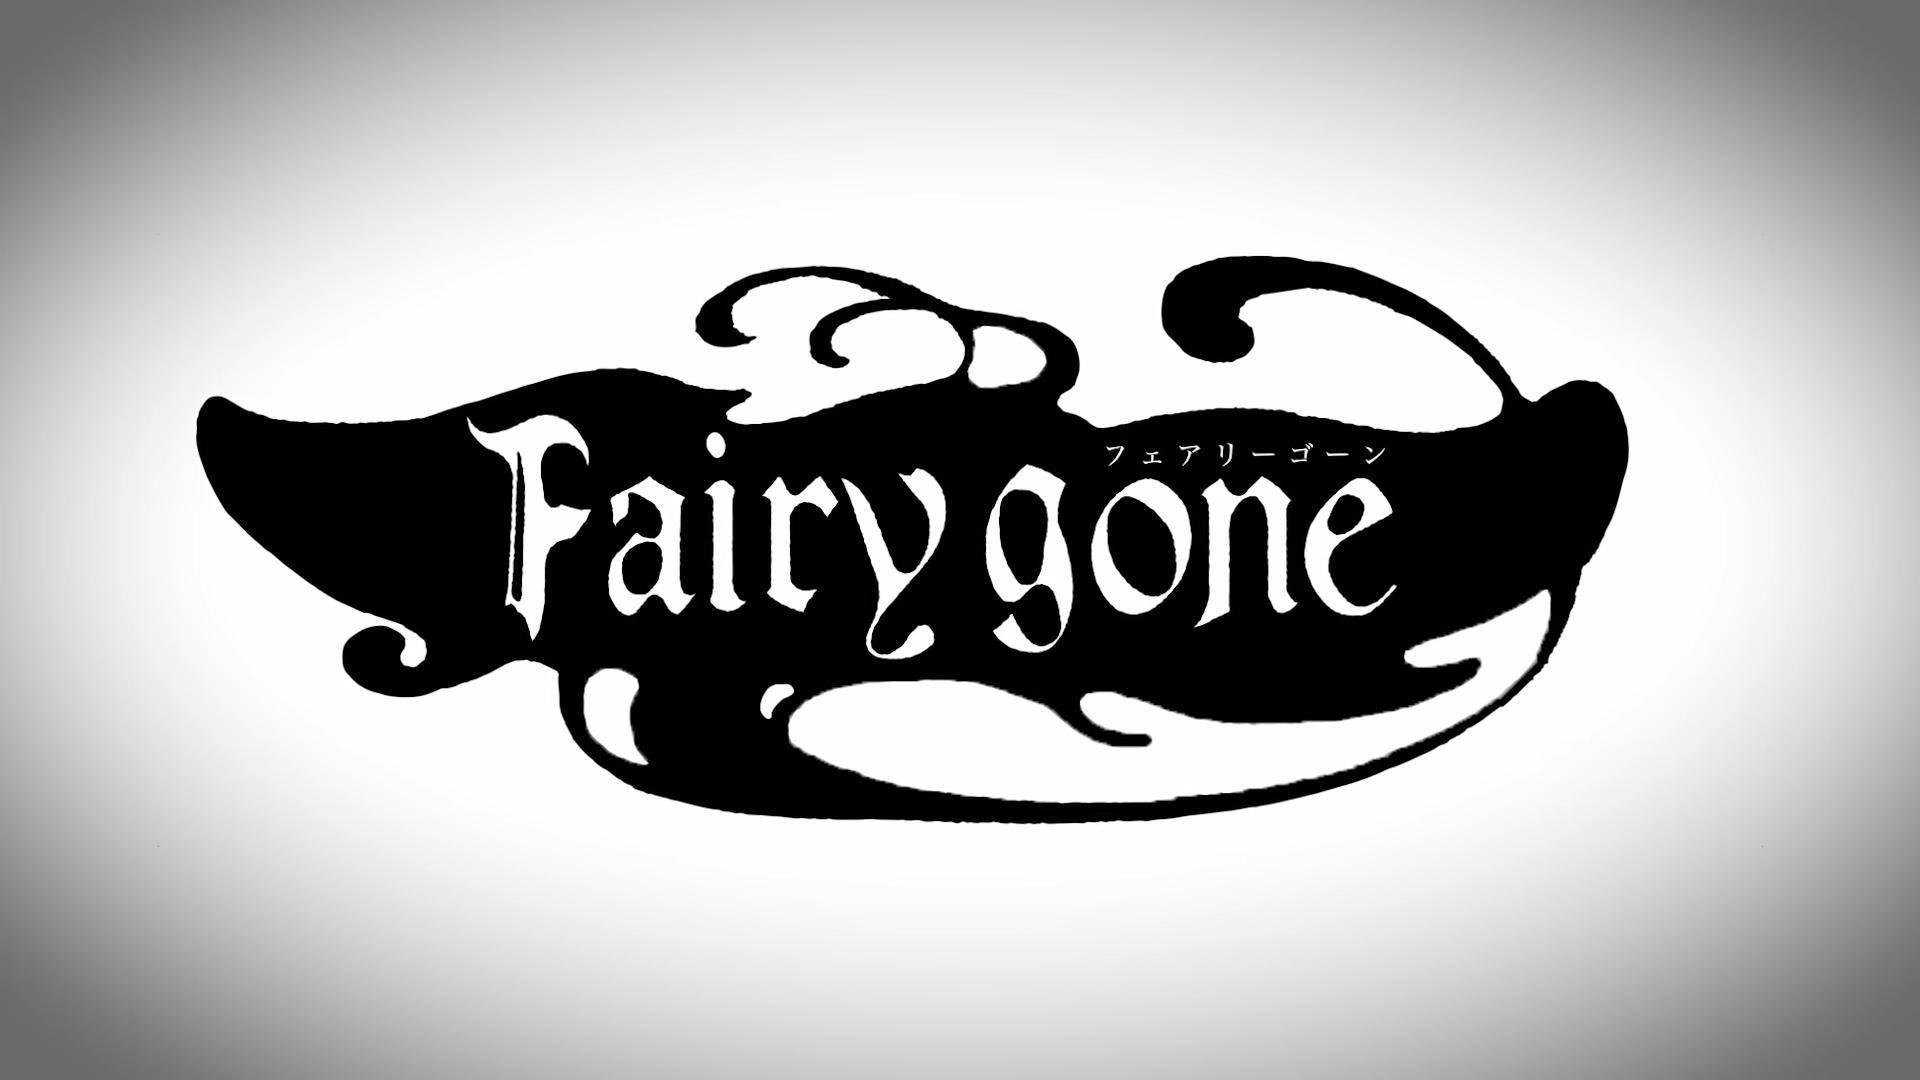 New Original Anime Fairy gone Revealed by P.A. Works